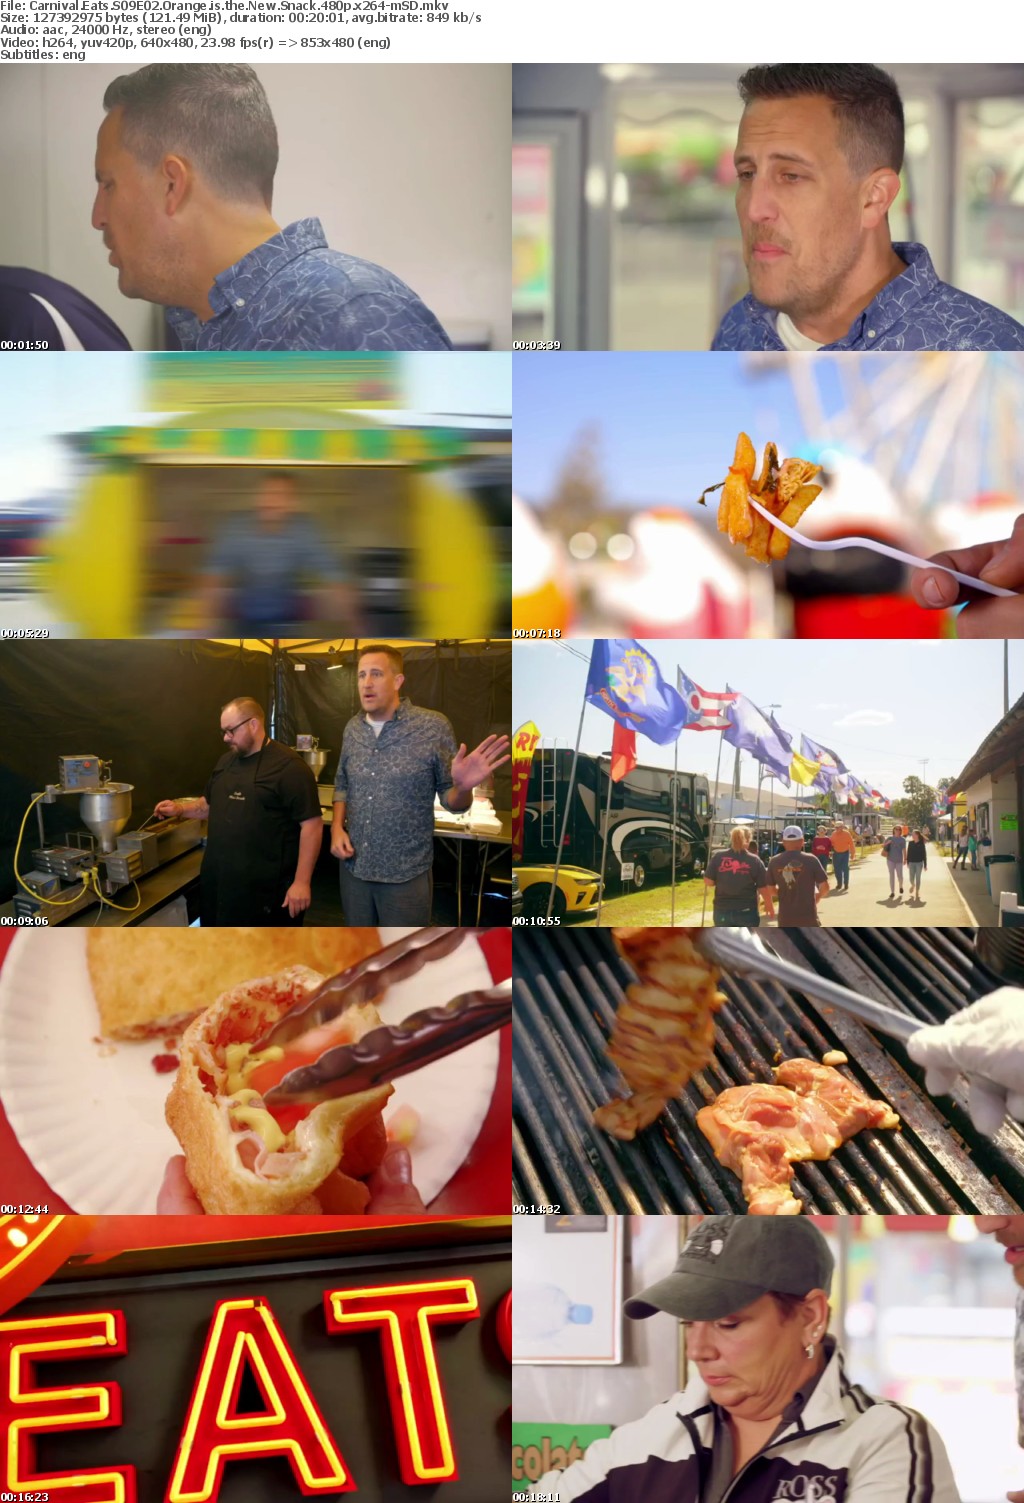 Carnival Eats S09E02 Orange is the New Snack 480p x264-mSD